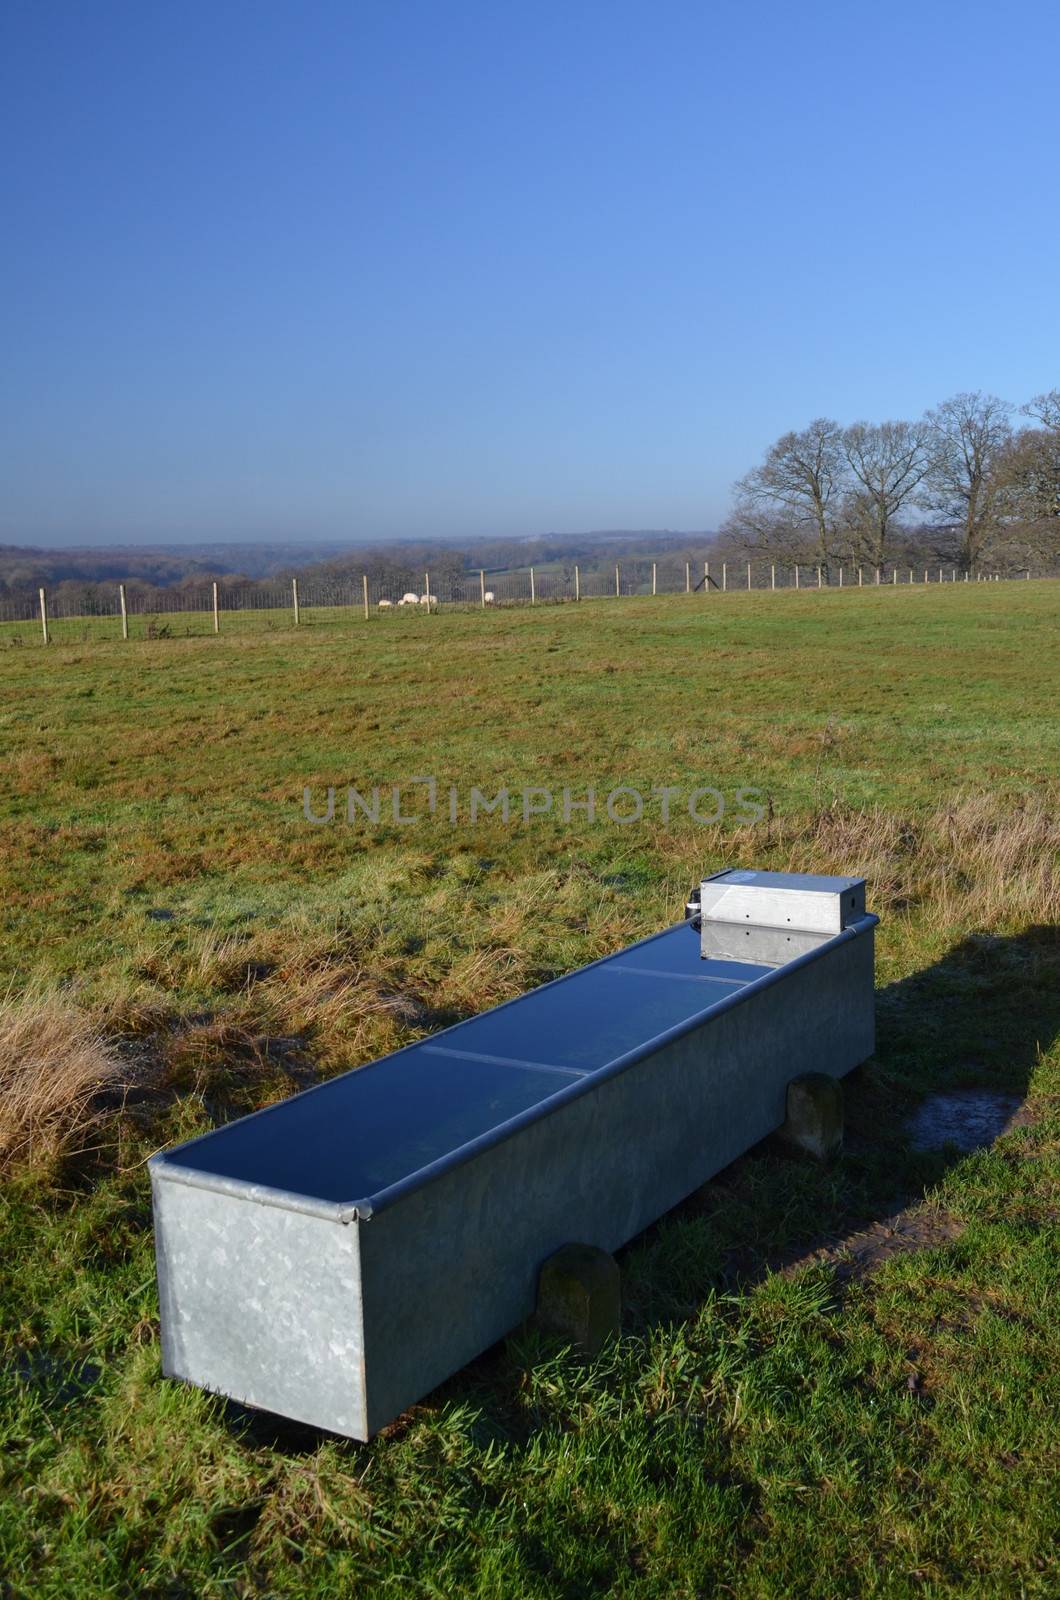 Metal animal water trough in a farmers field in Sussex,England.